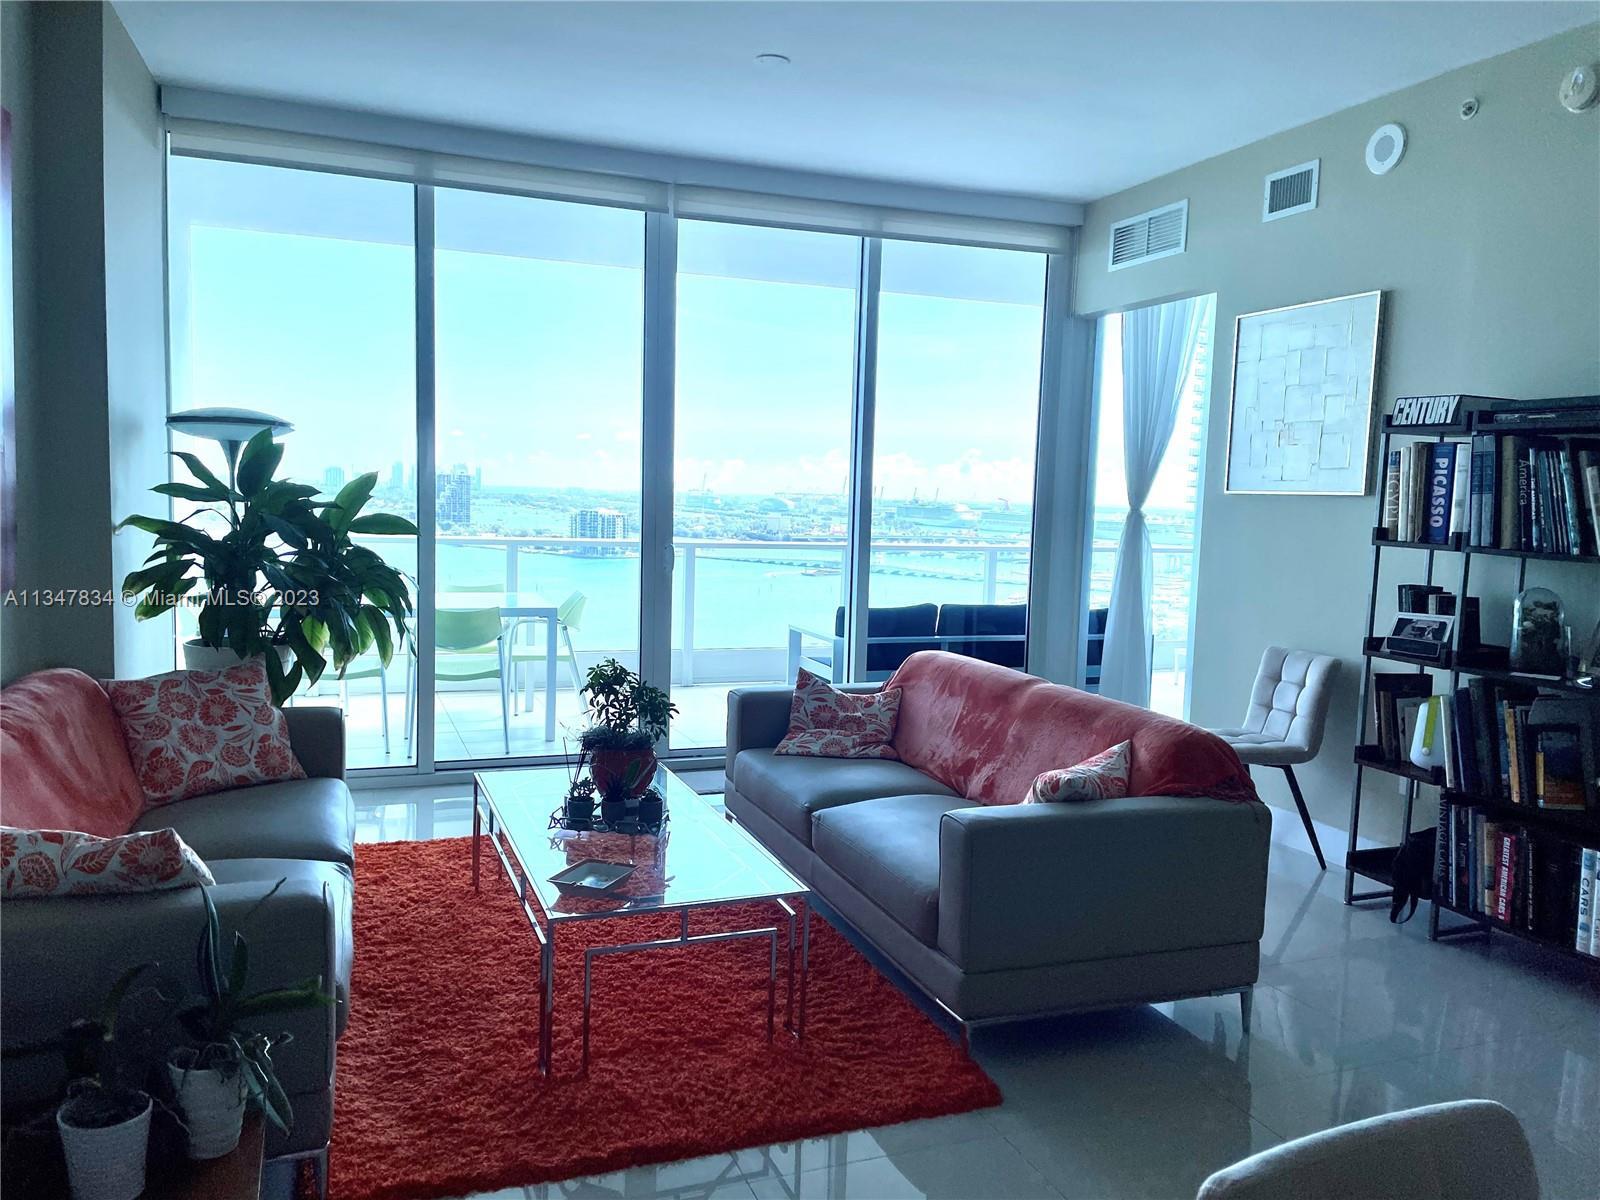 Beautiful flow through unit with unobstructed view facing bay and ocean on a large terrace at east s